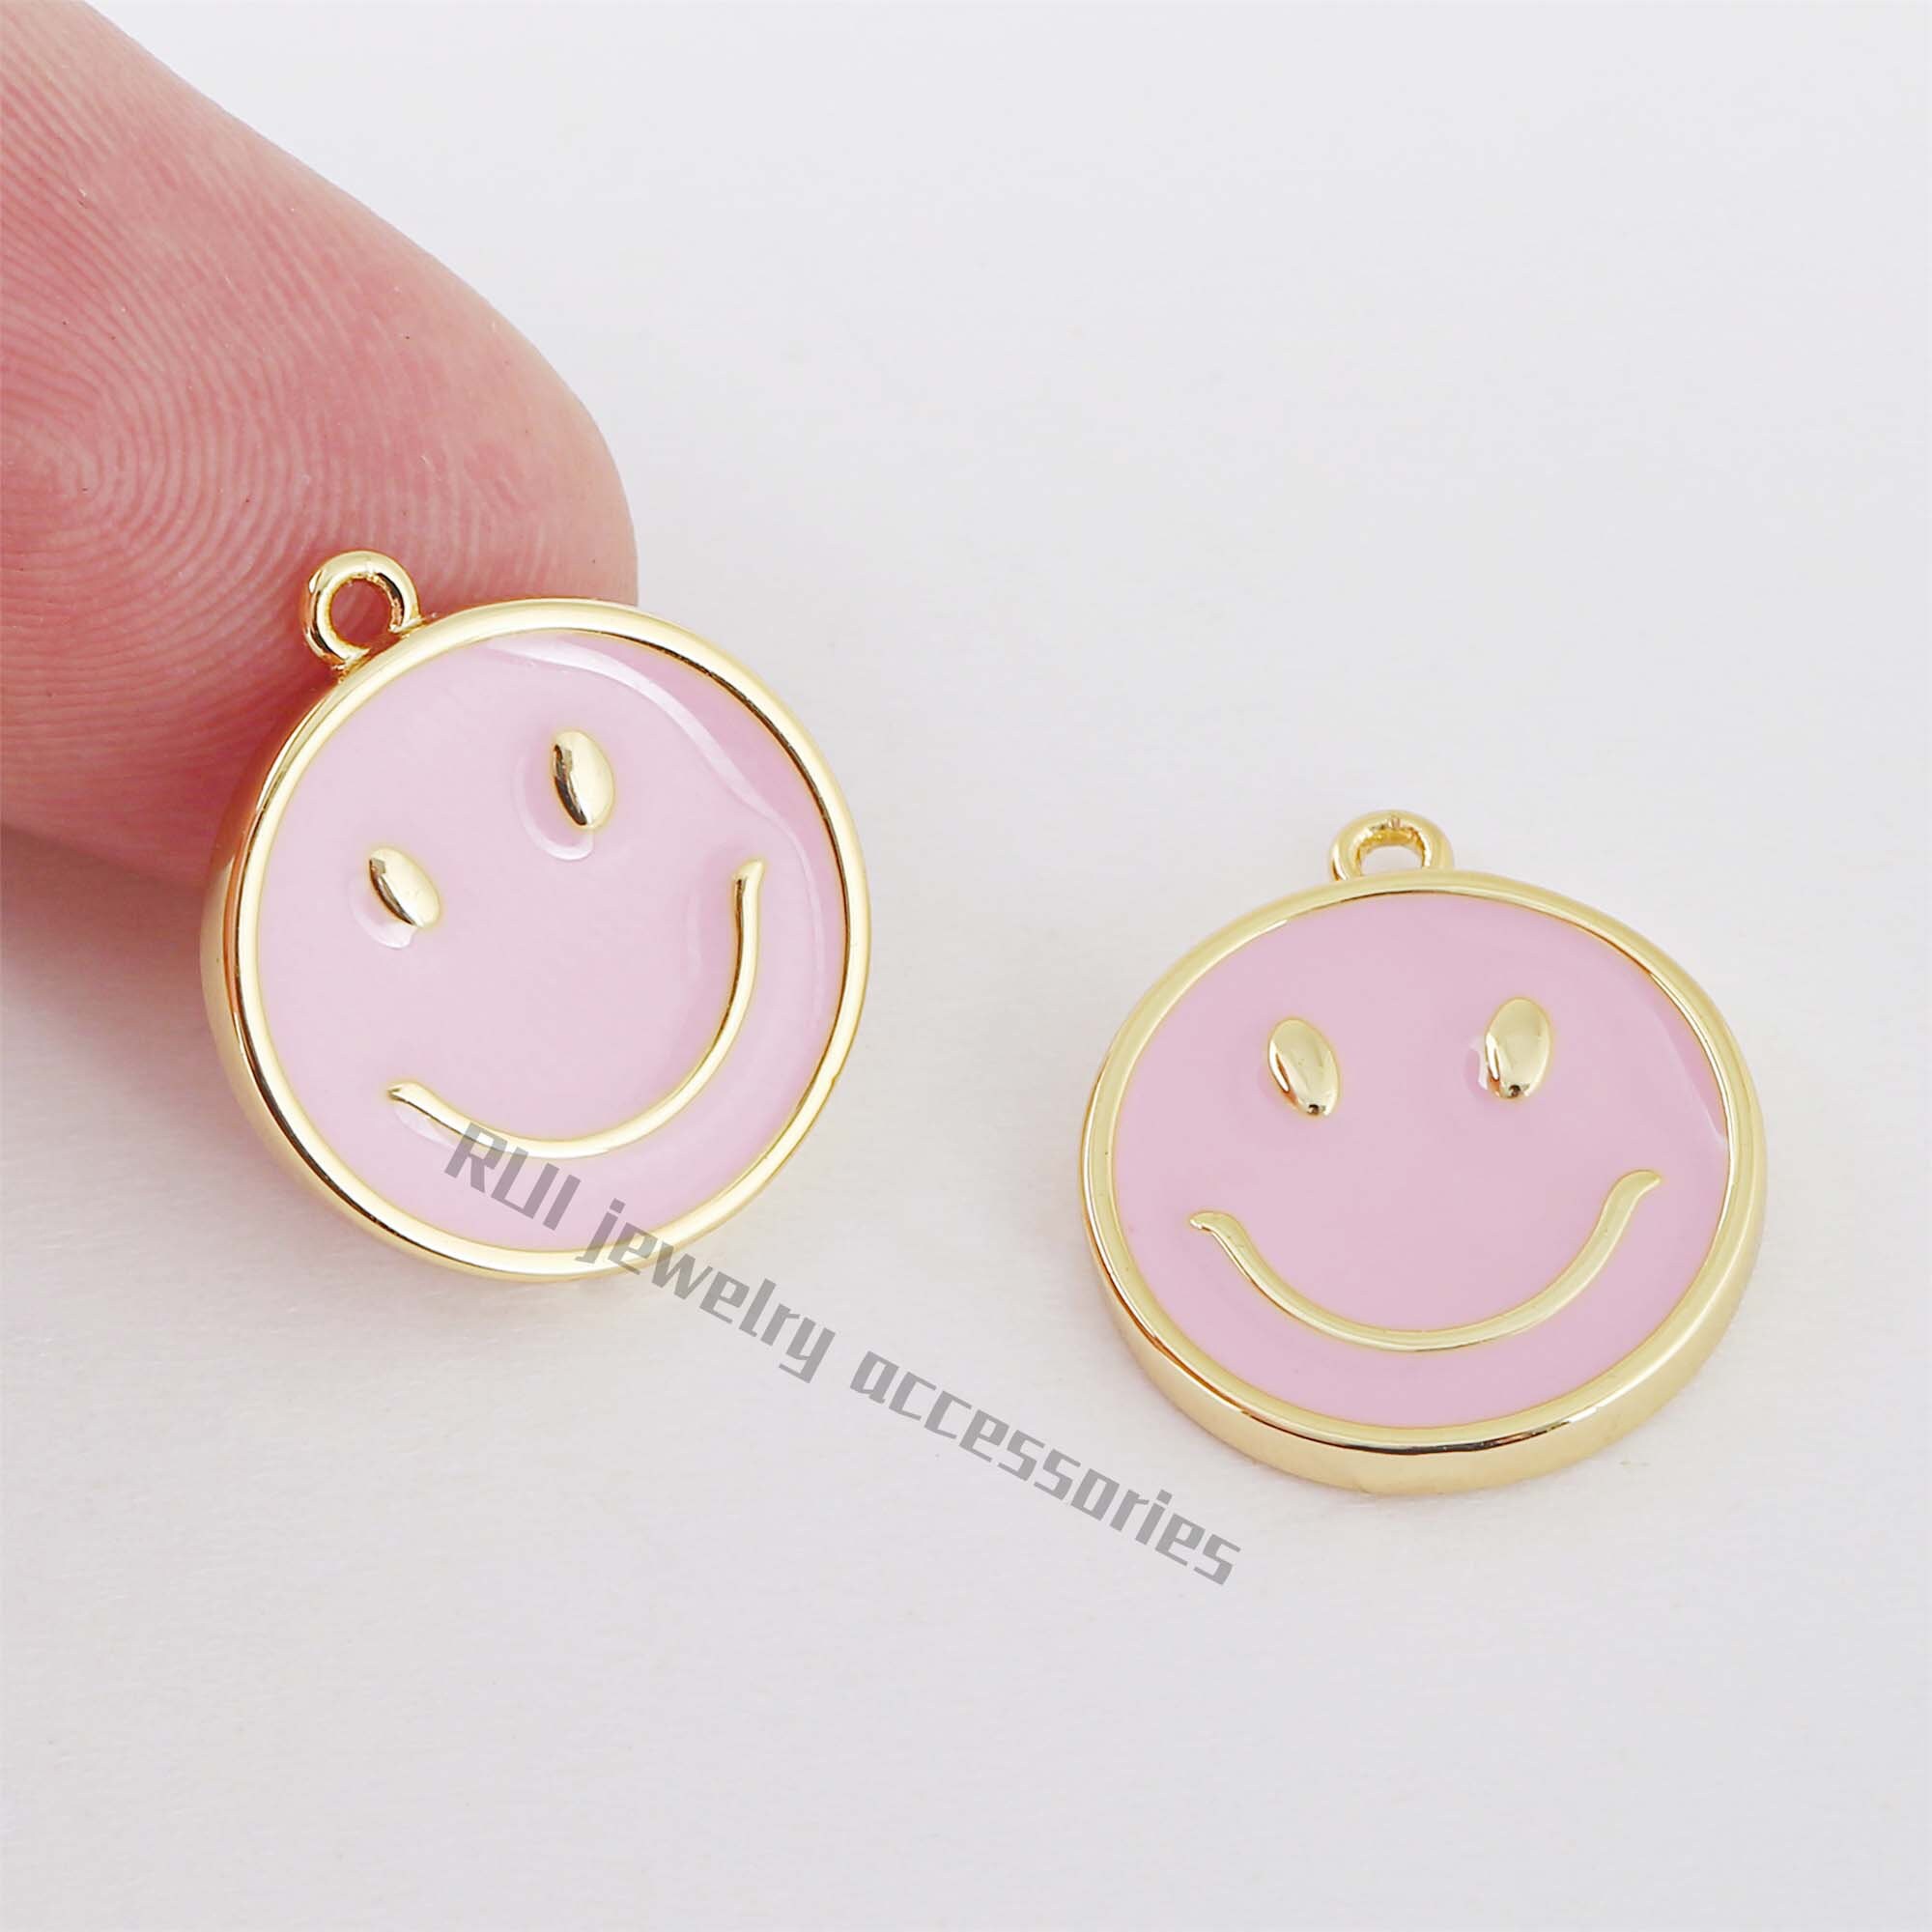 6pcs Real Gold Plated Dainty Enamel Charm Smile - Etsy